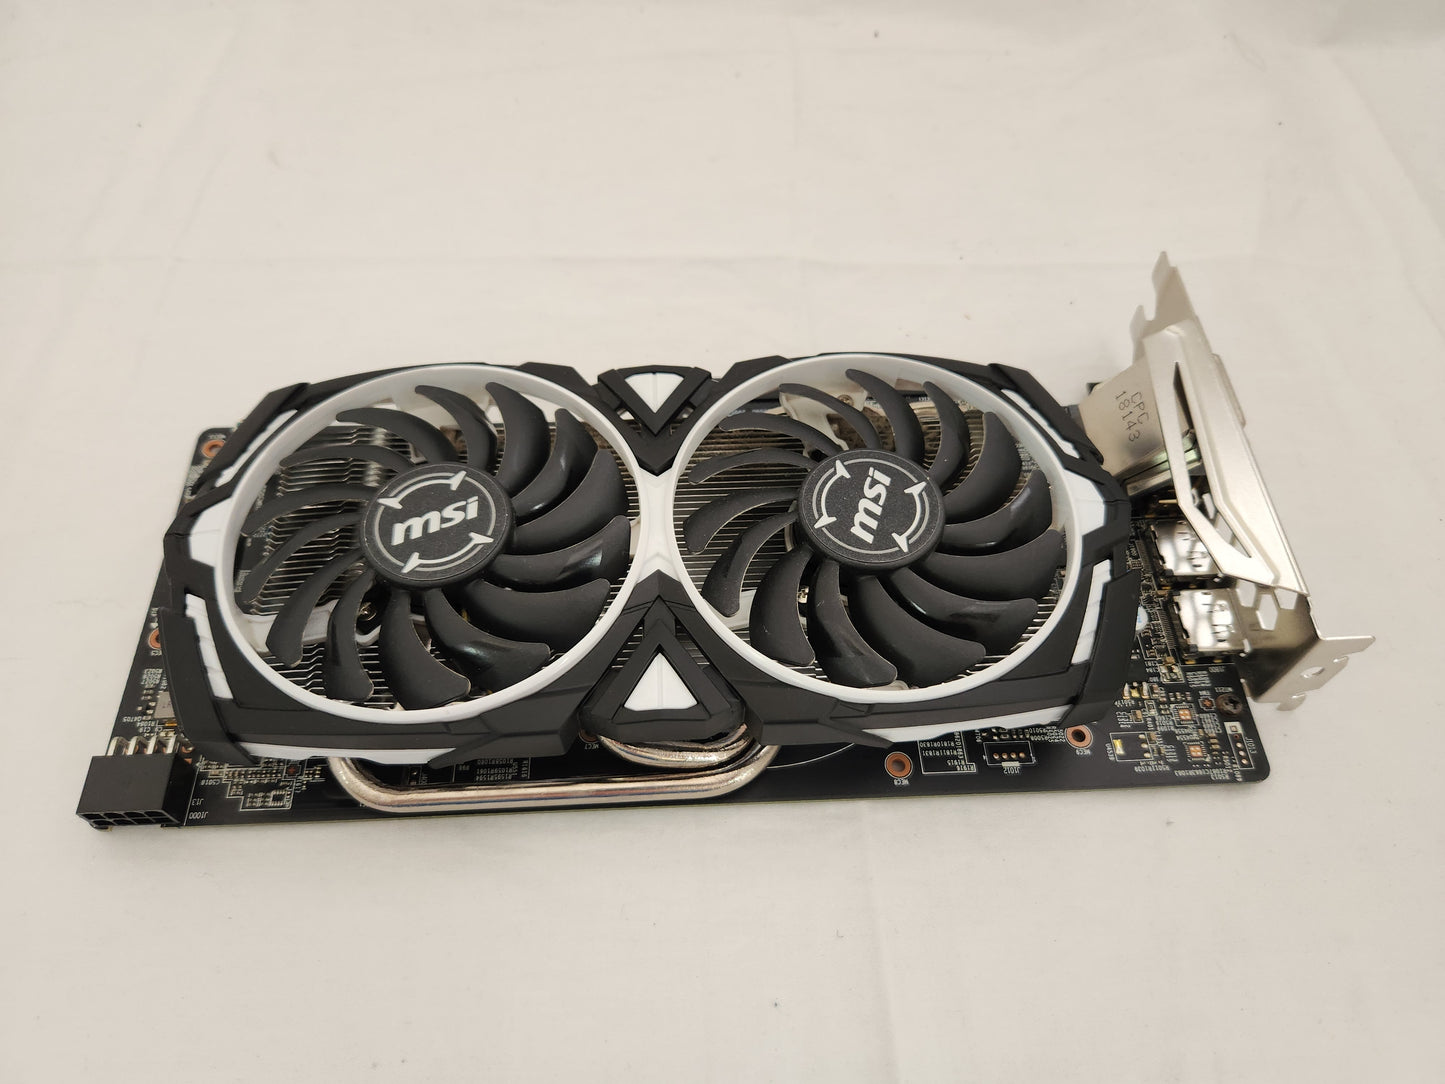 MSI Radeon RX 580 8gb Armor OC Gaming Graphics Card (not tested)